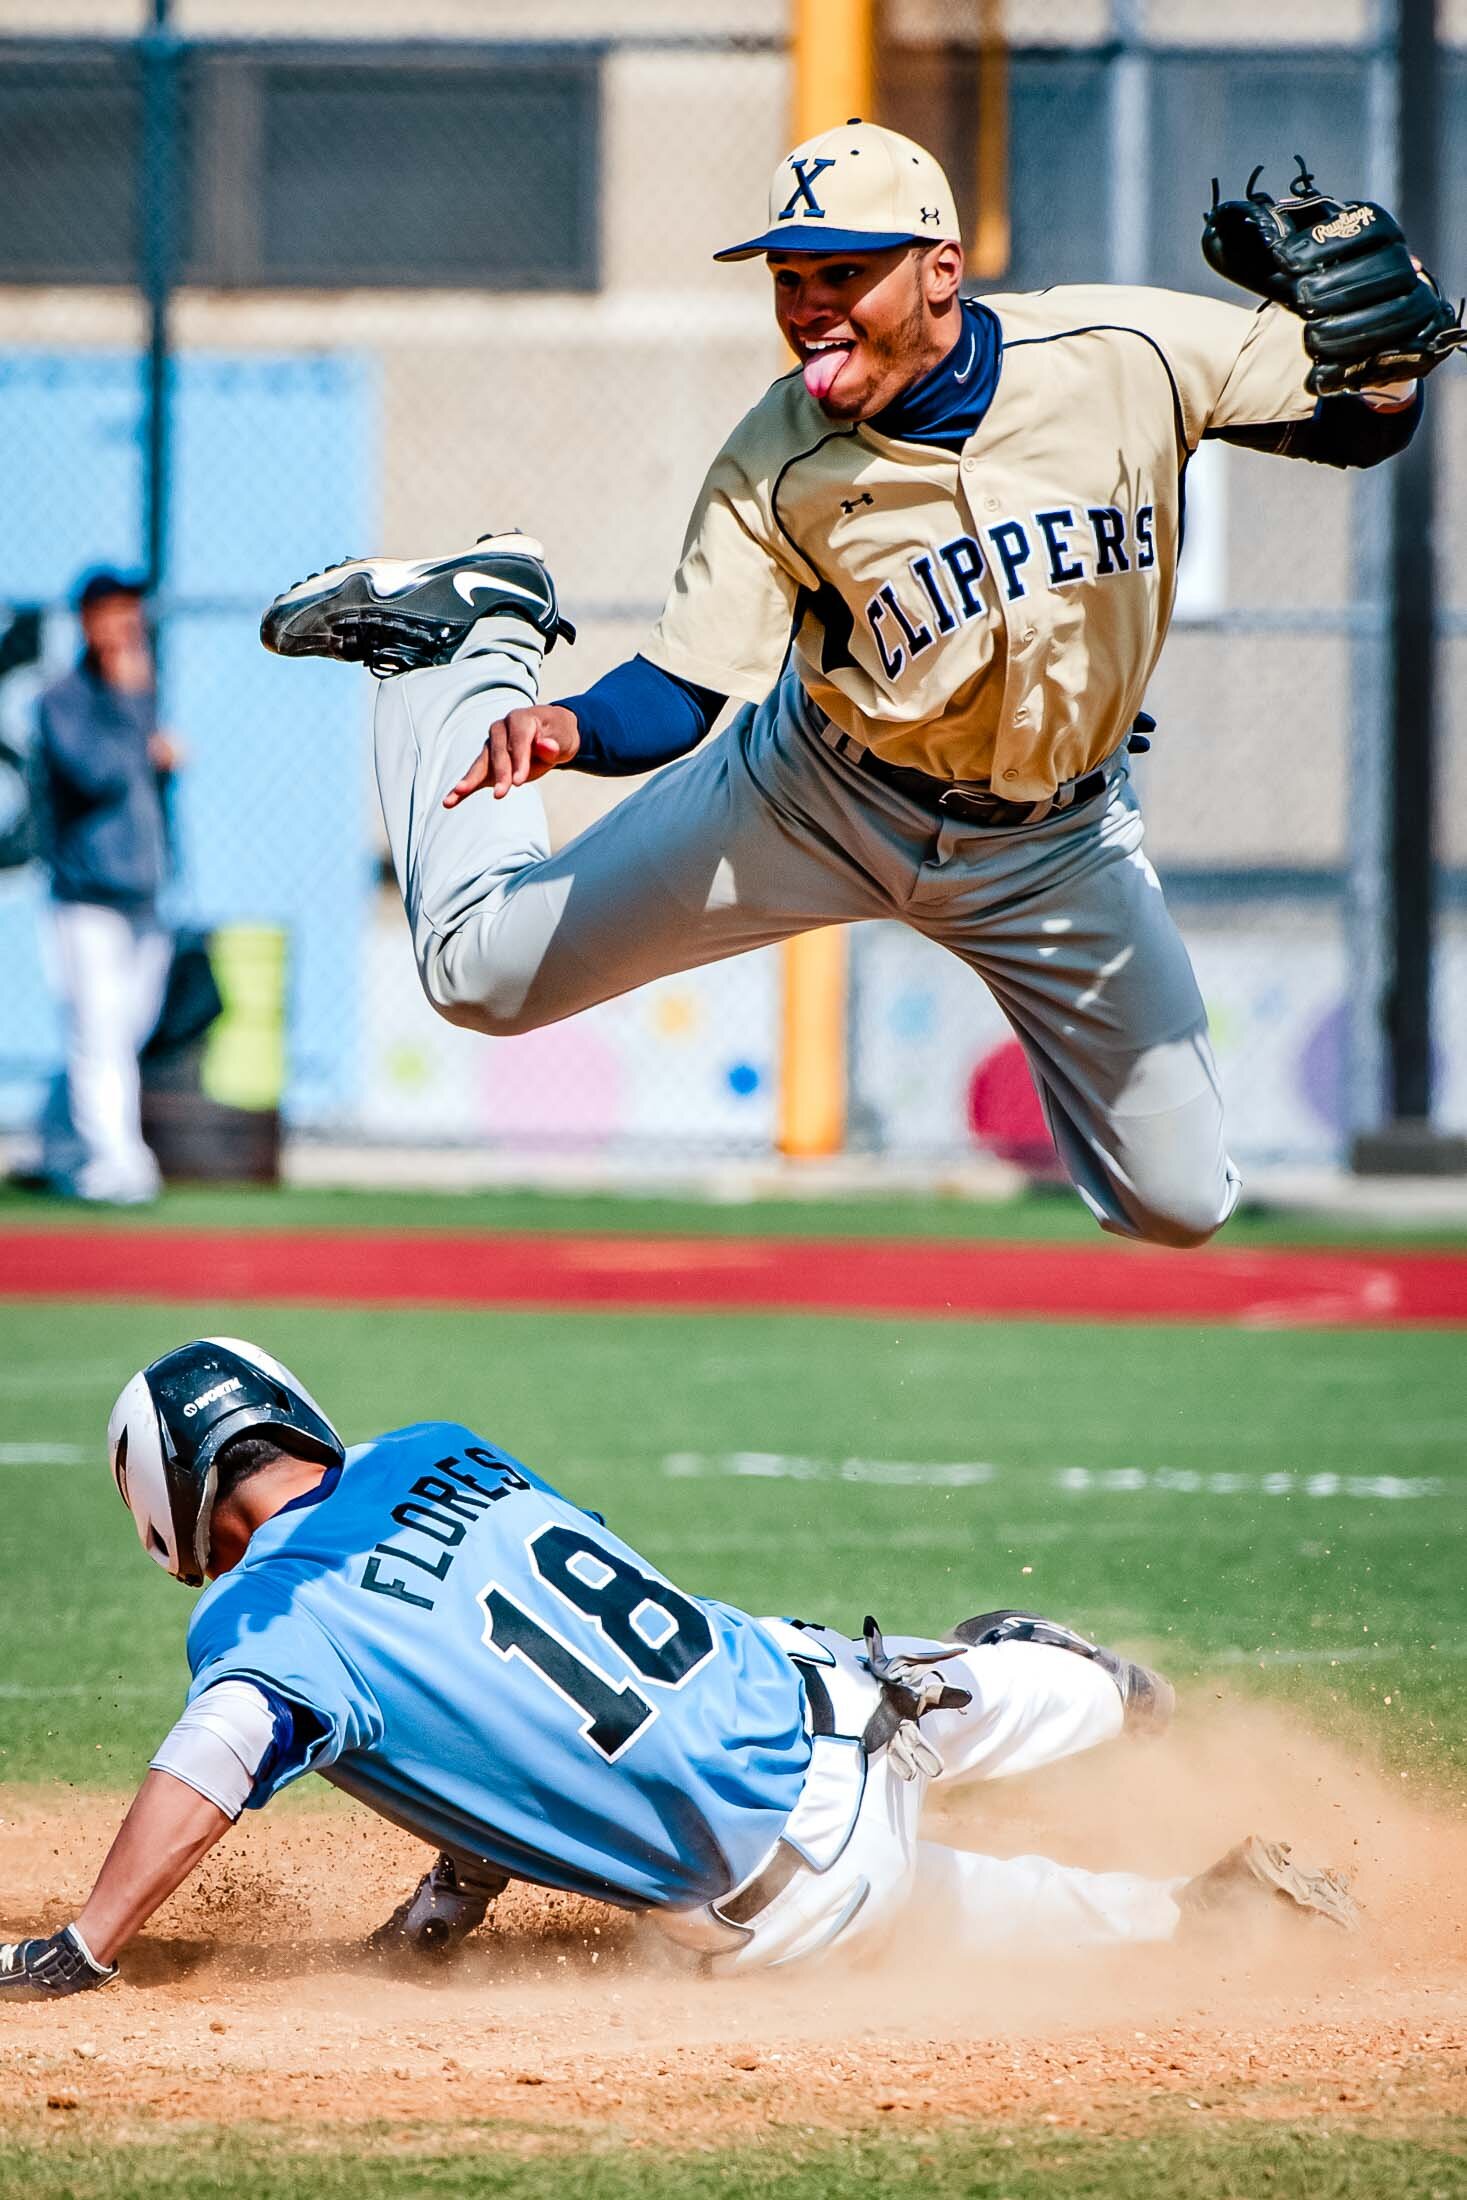  Xaverian's Gabe Hernandez jumps over Grand Street's Kelvin Flores on second base in Grand Street HS in Brooklyn 